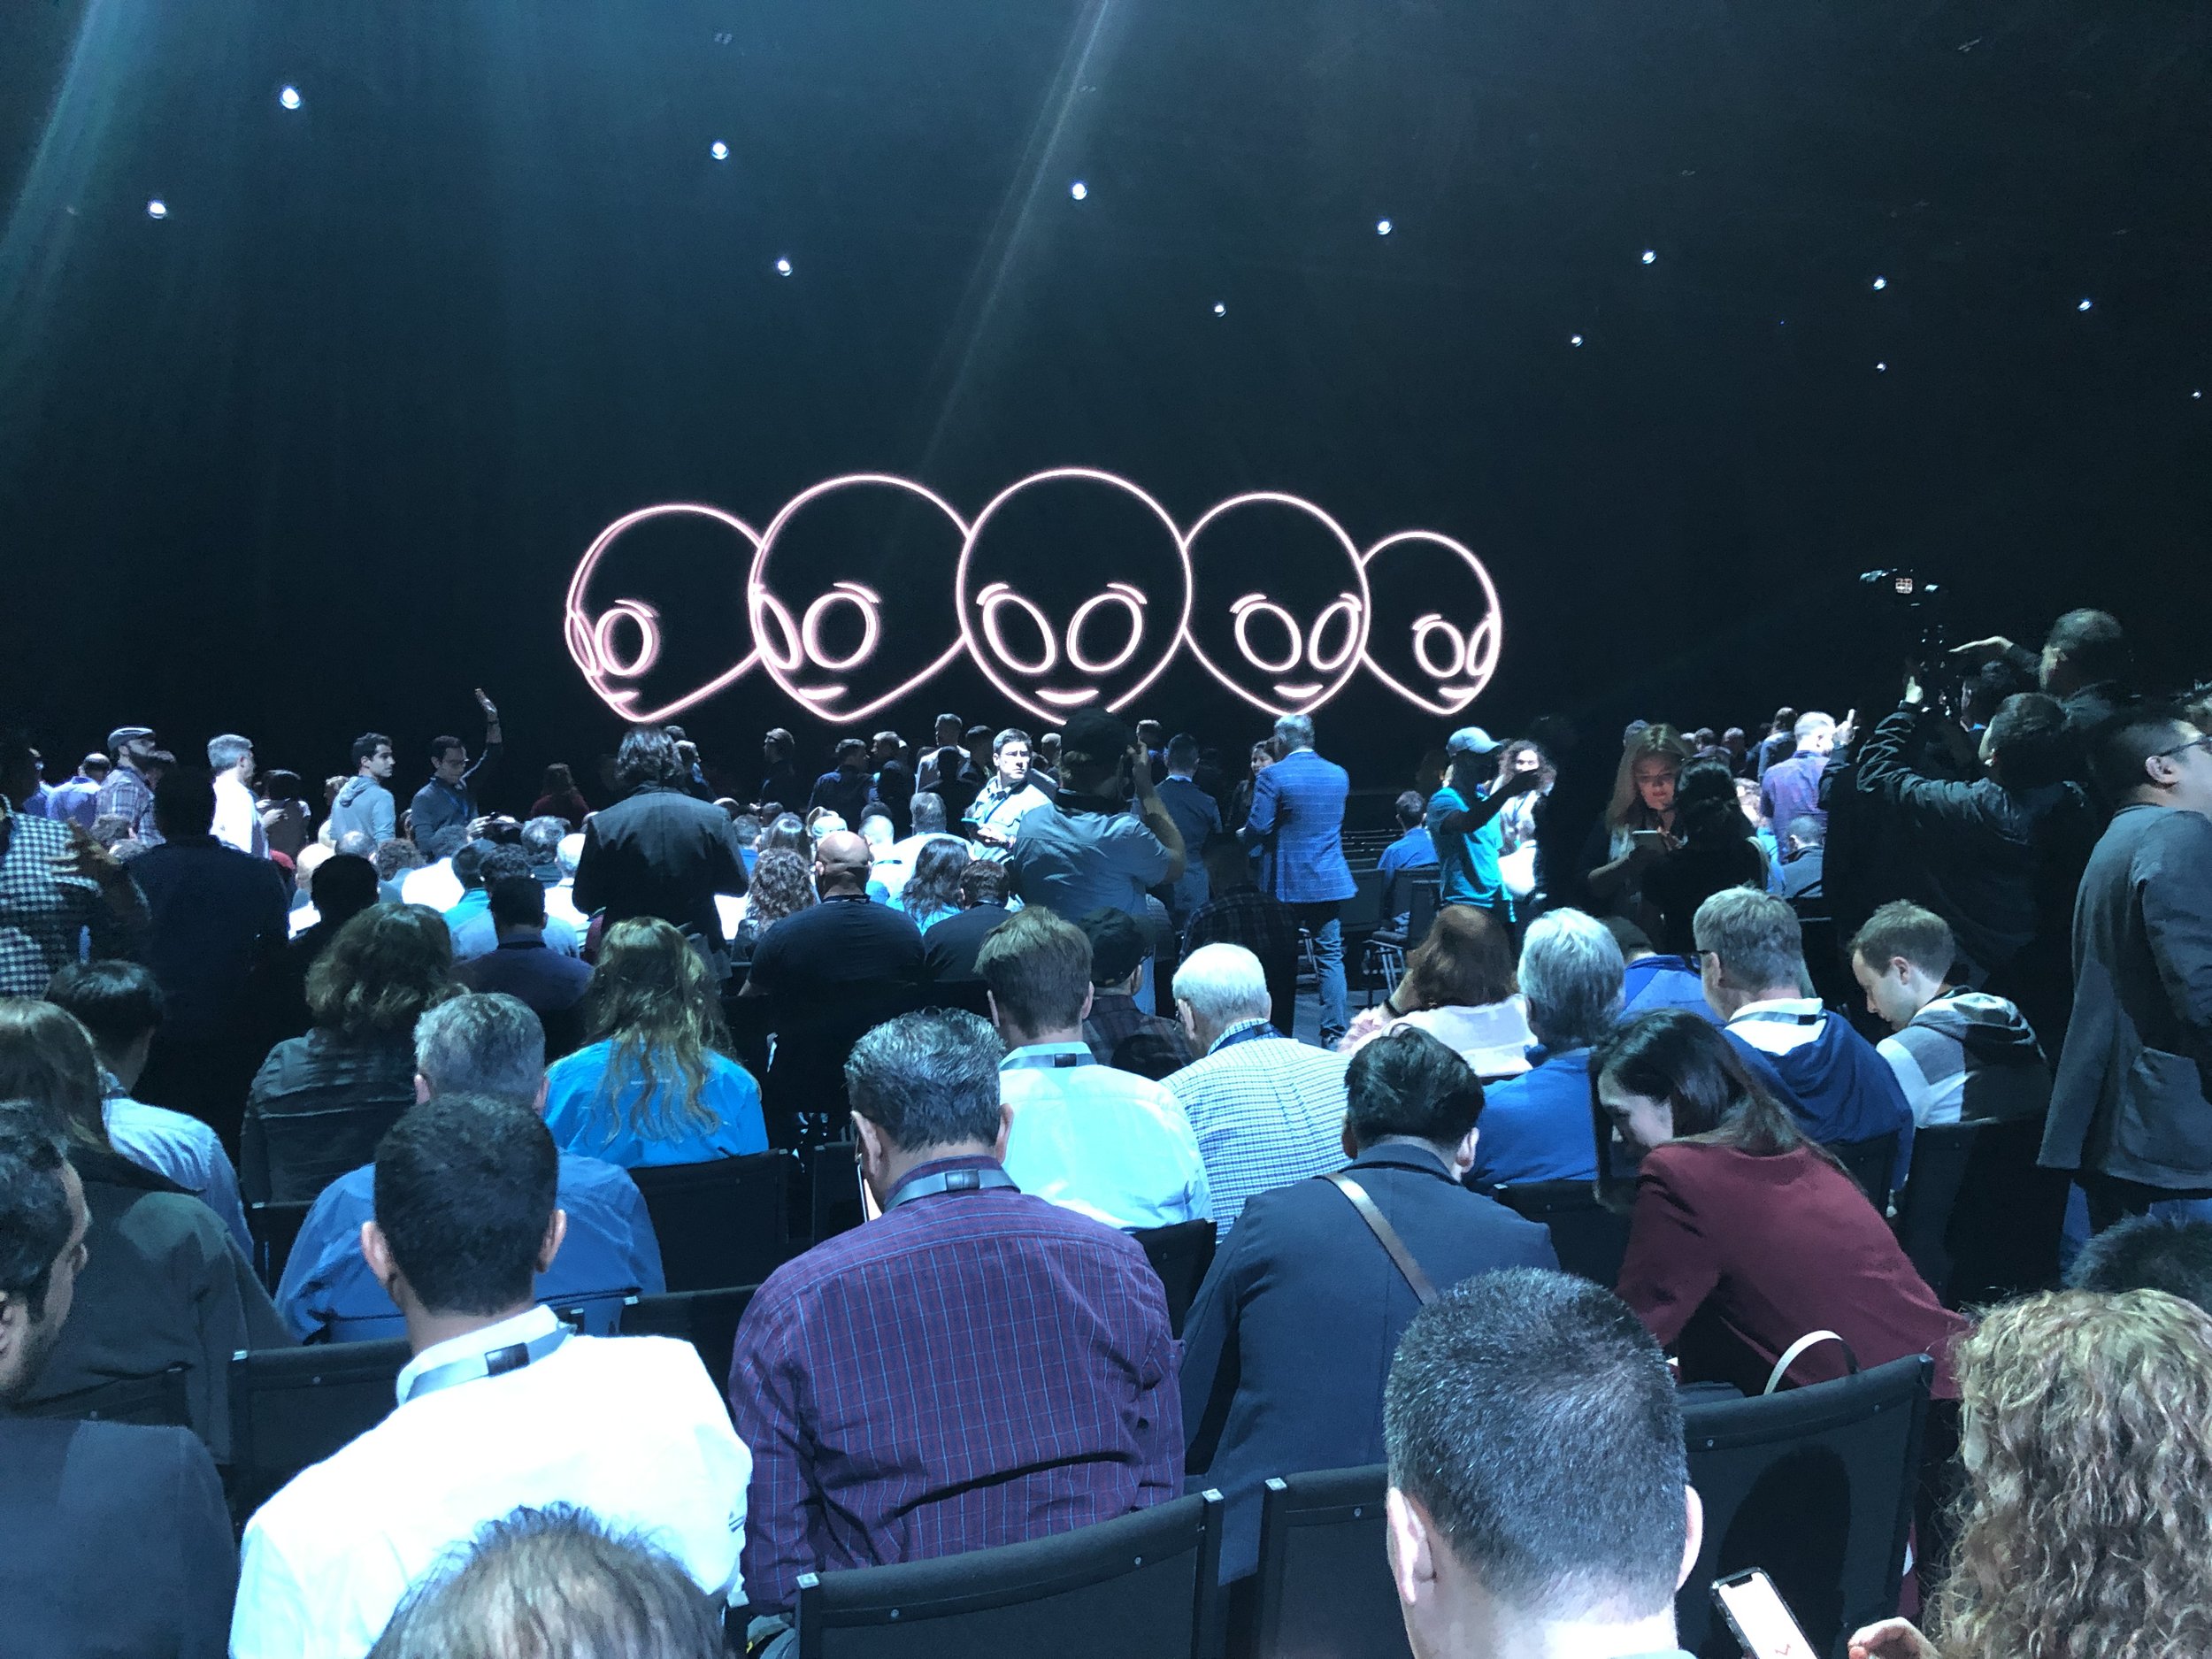 Waiting for the Keynote